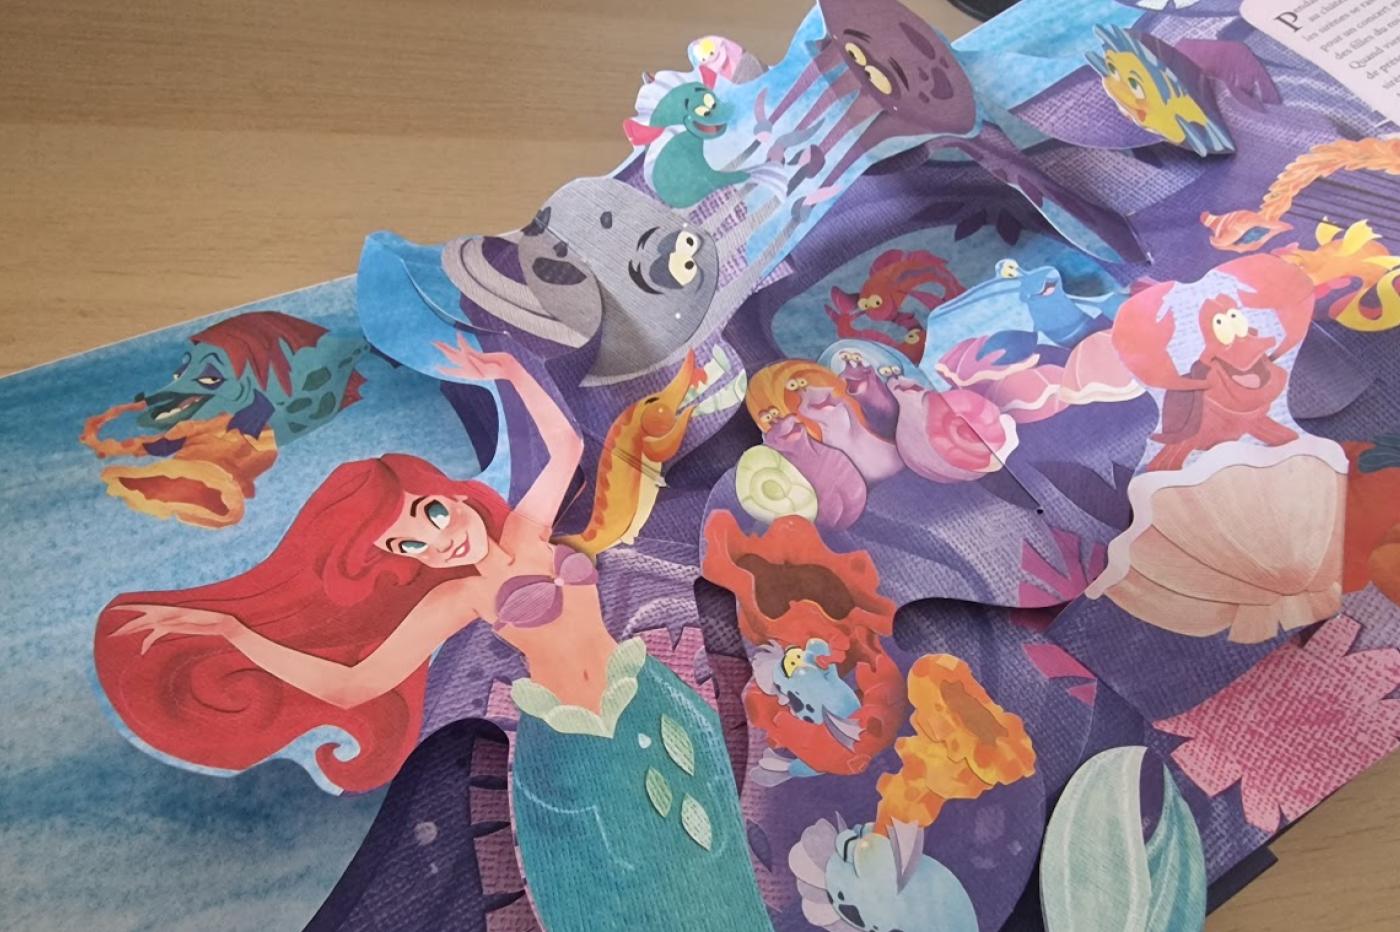 The little mermaid pop up book